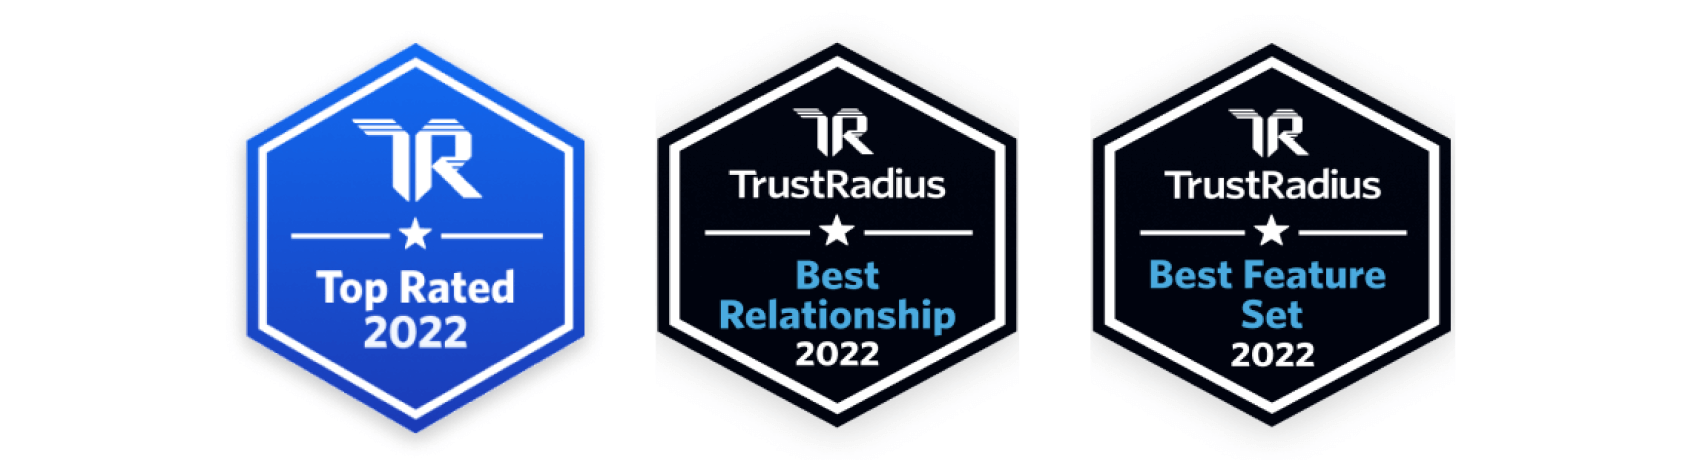 3 TrustRadius award emblems earned by Rescue in 2022 in the Remote Desktop Software category: Top Rated, Best Feature Set, and Best Relationship 